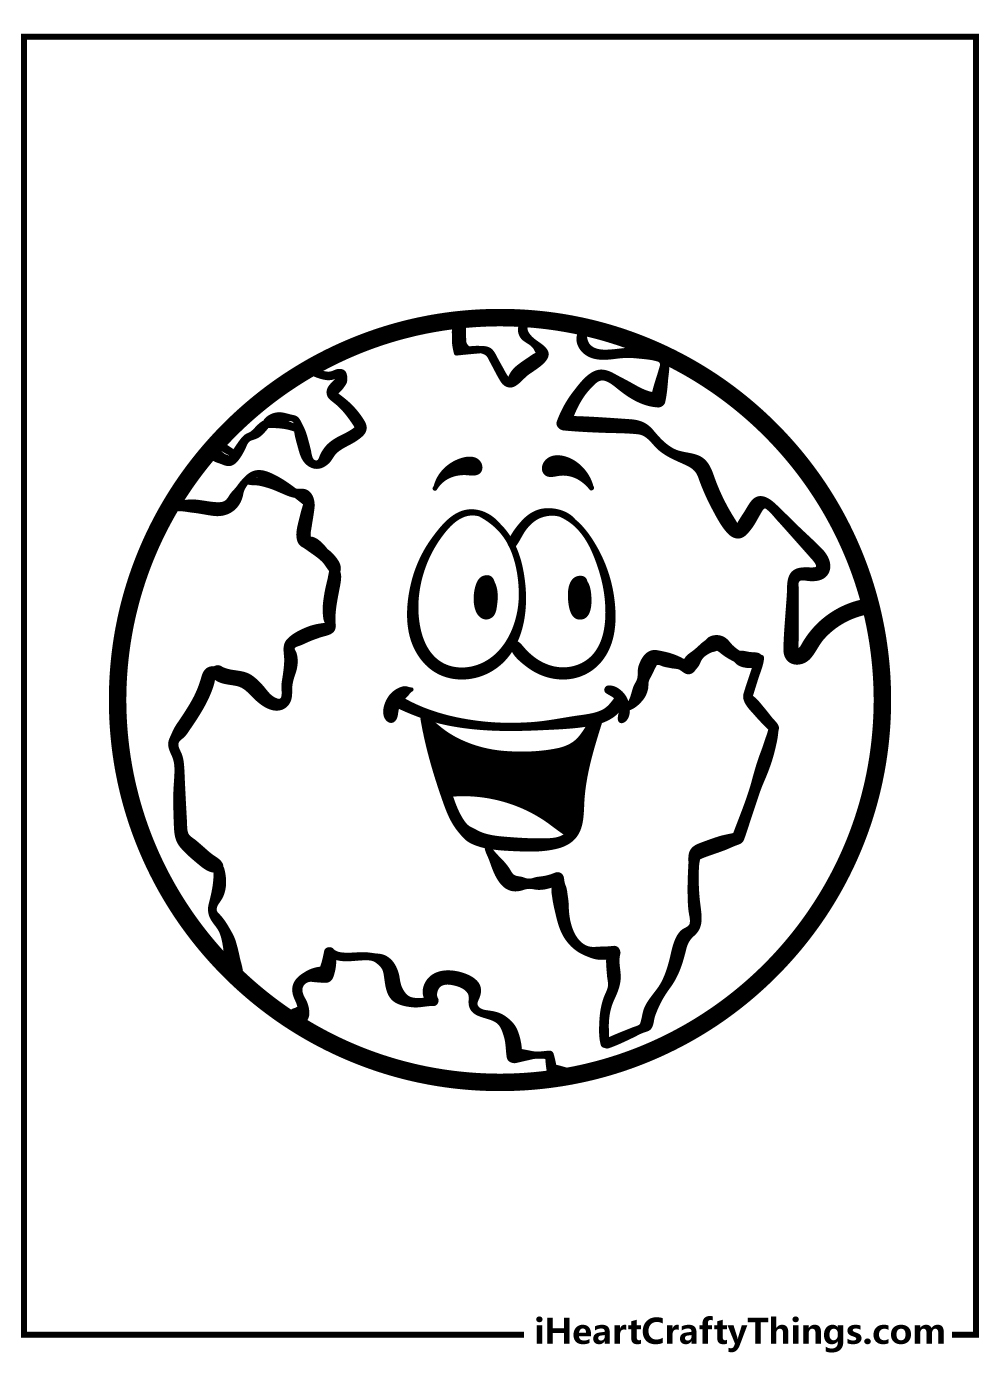 Earth Coloring Pages for adults free printable